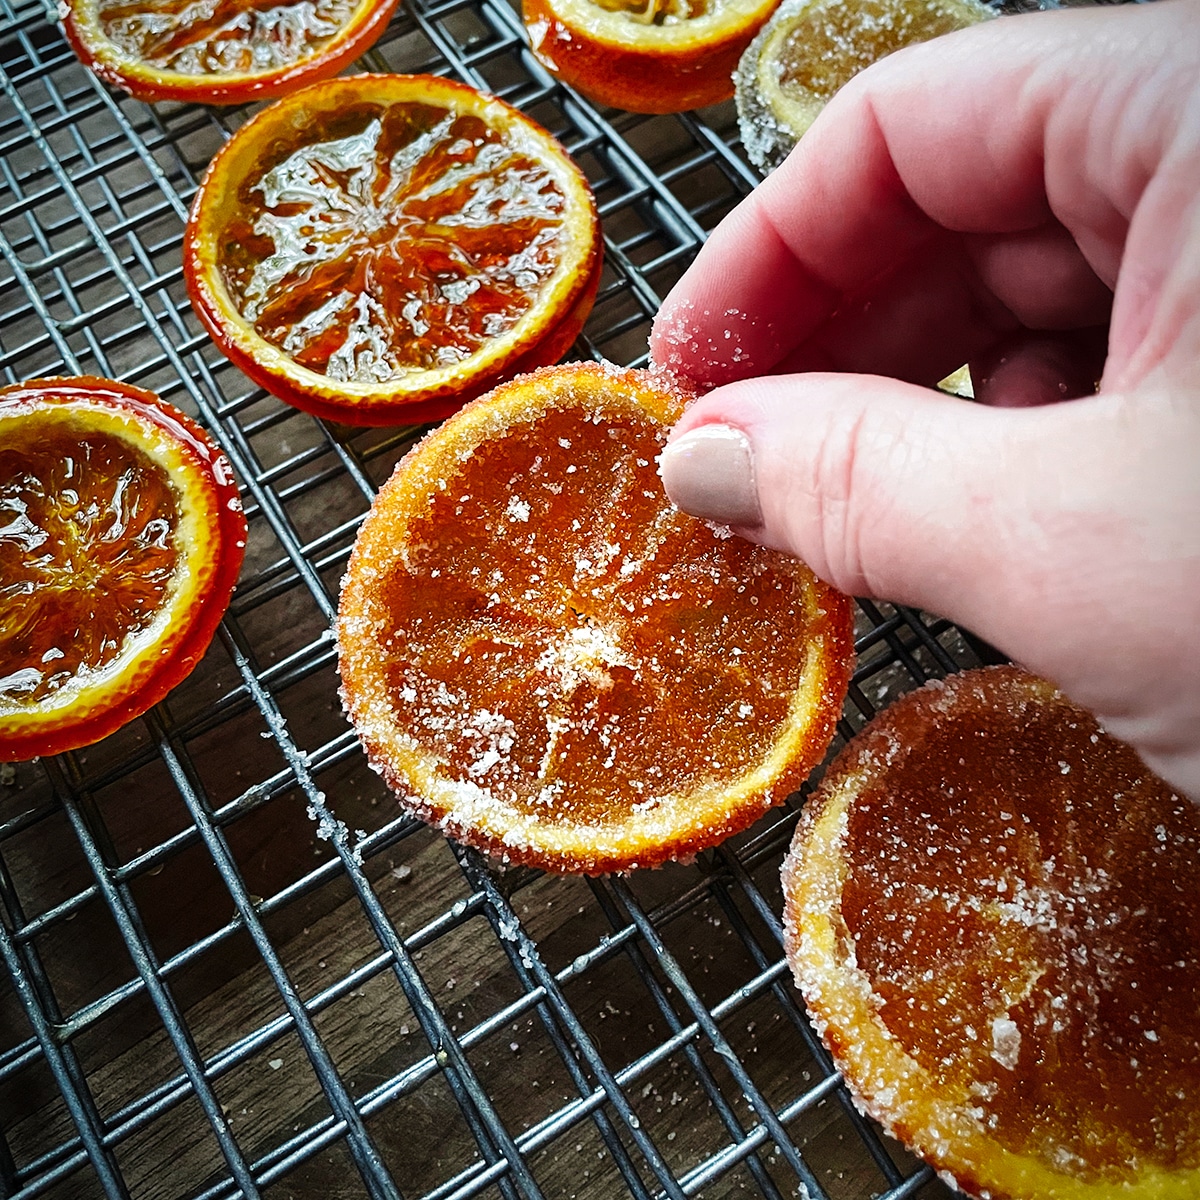 Placing a candied orange slice that's been dipped in sugar on a wire rack.